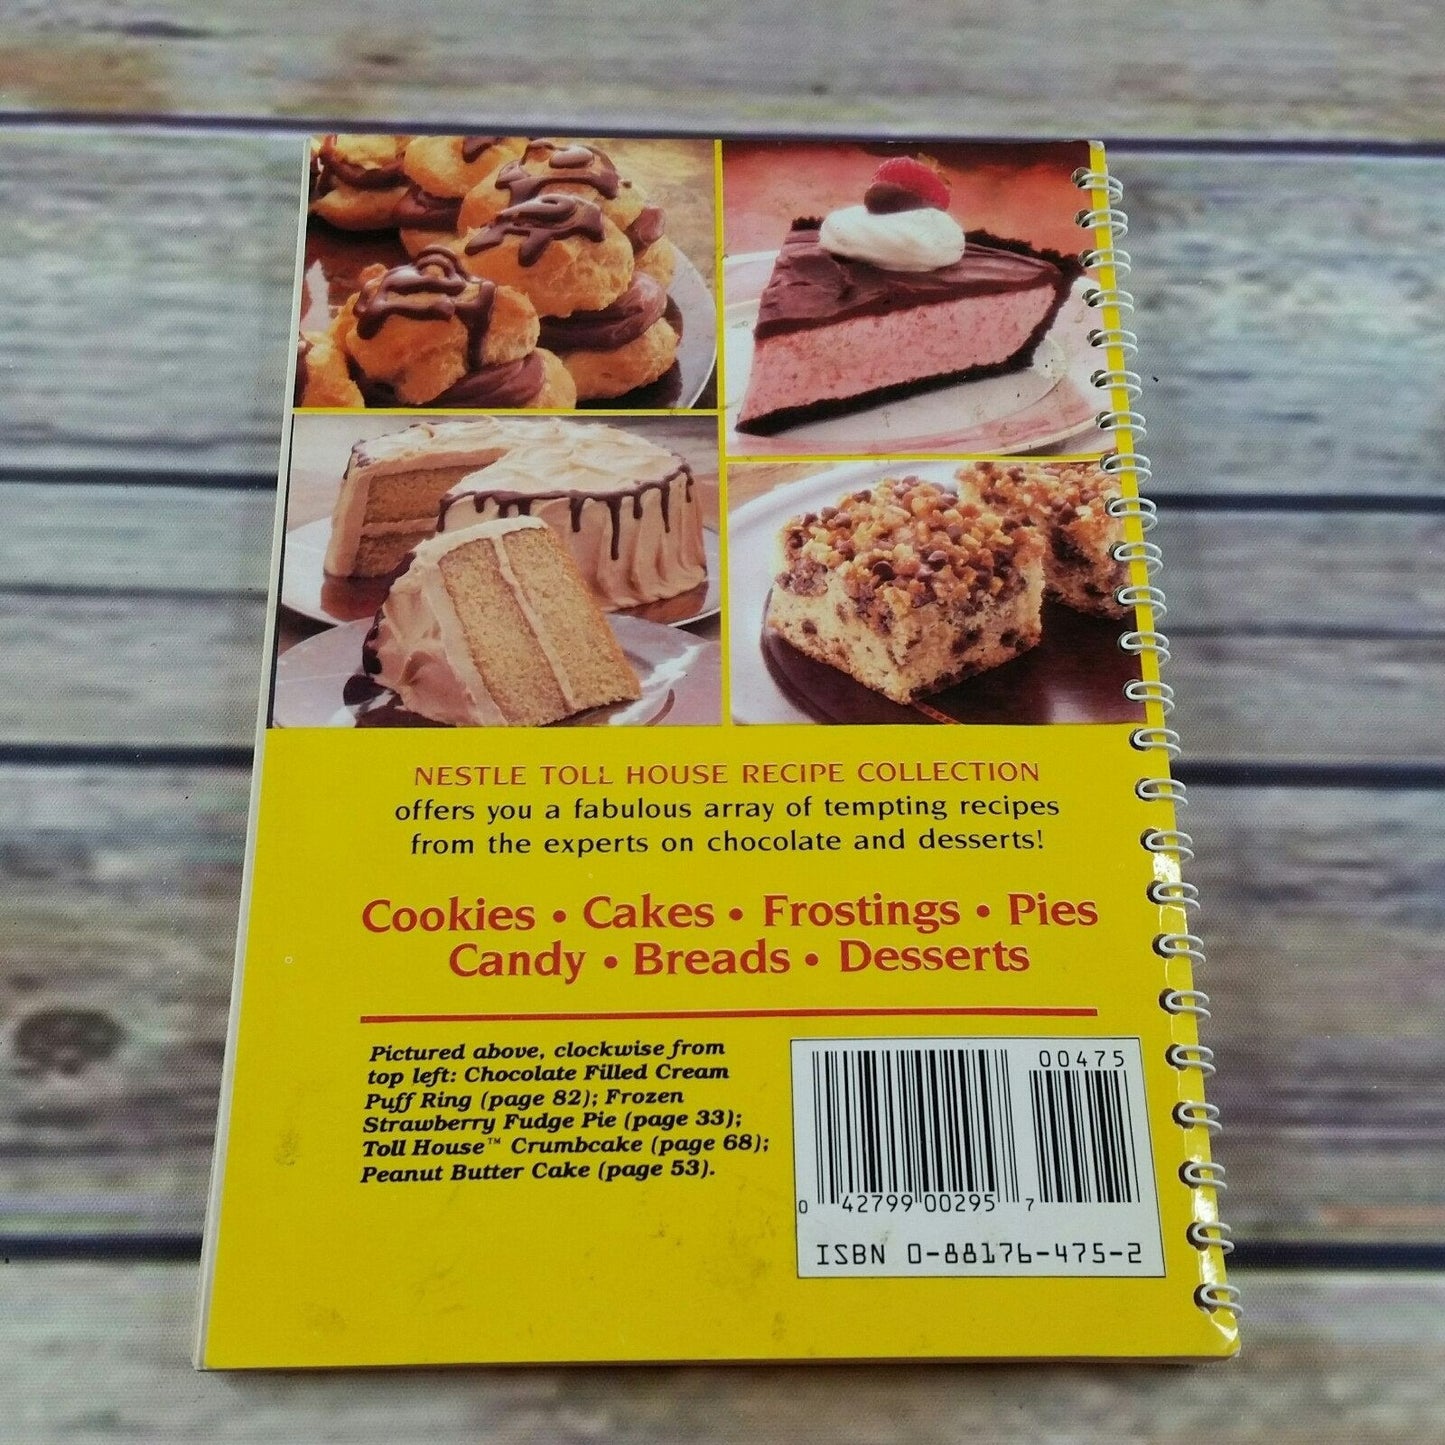 Vintage Cookbook Nestle Recipe Collection Toll House 1987 Cookies Pies Cakes Spiral Bound Paperback